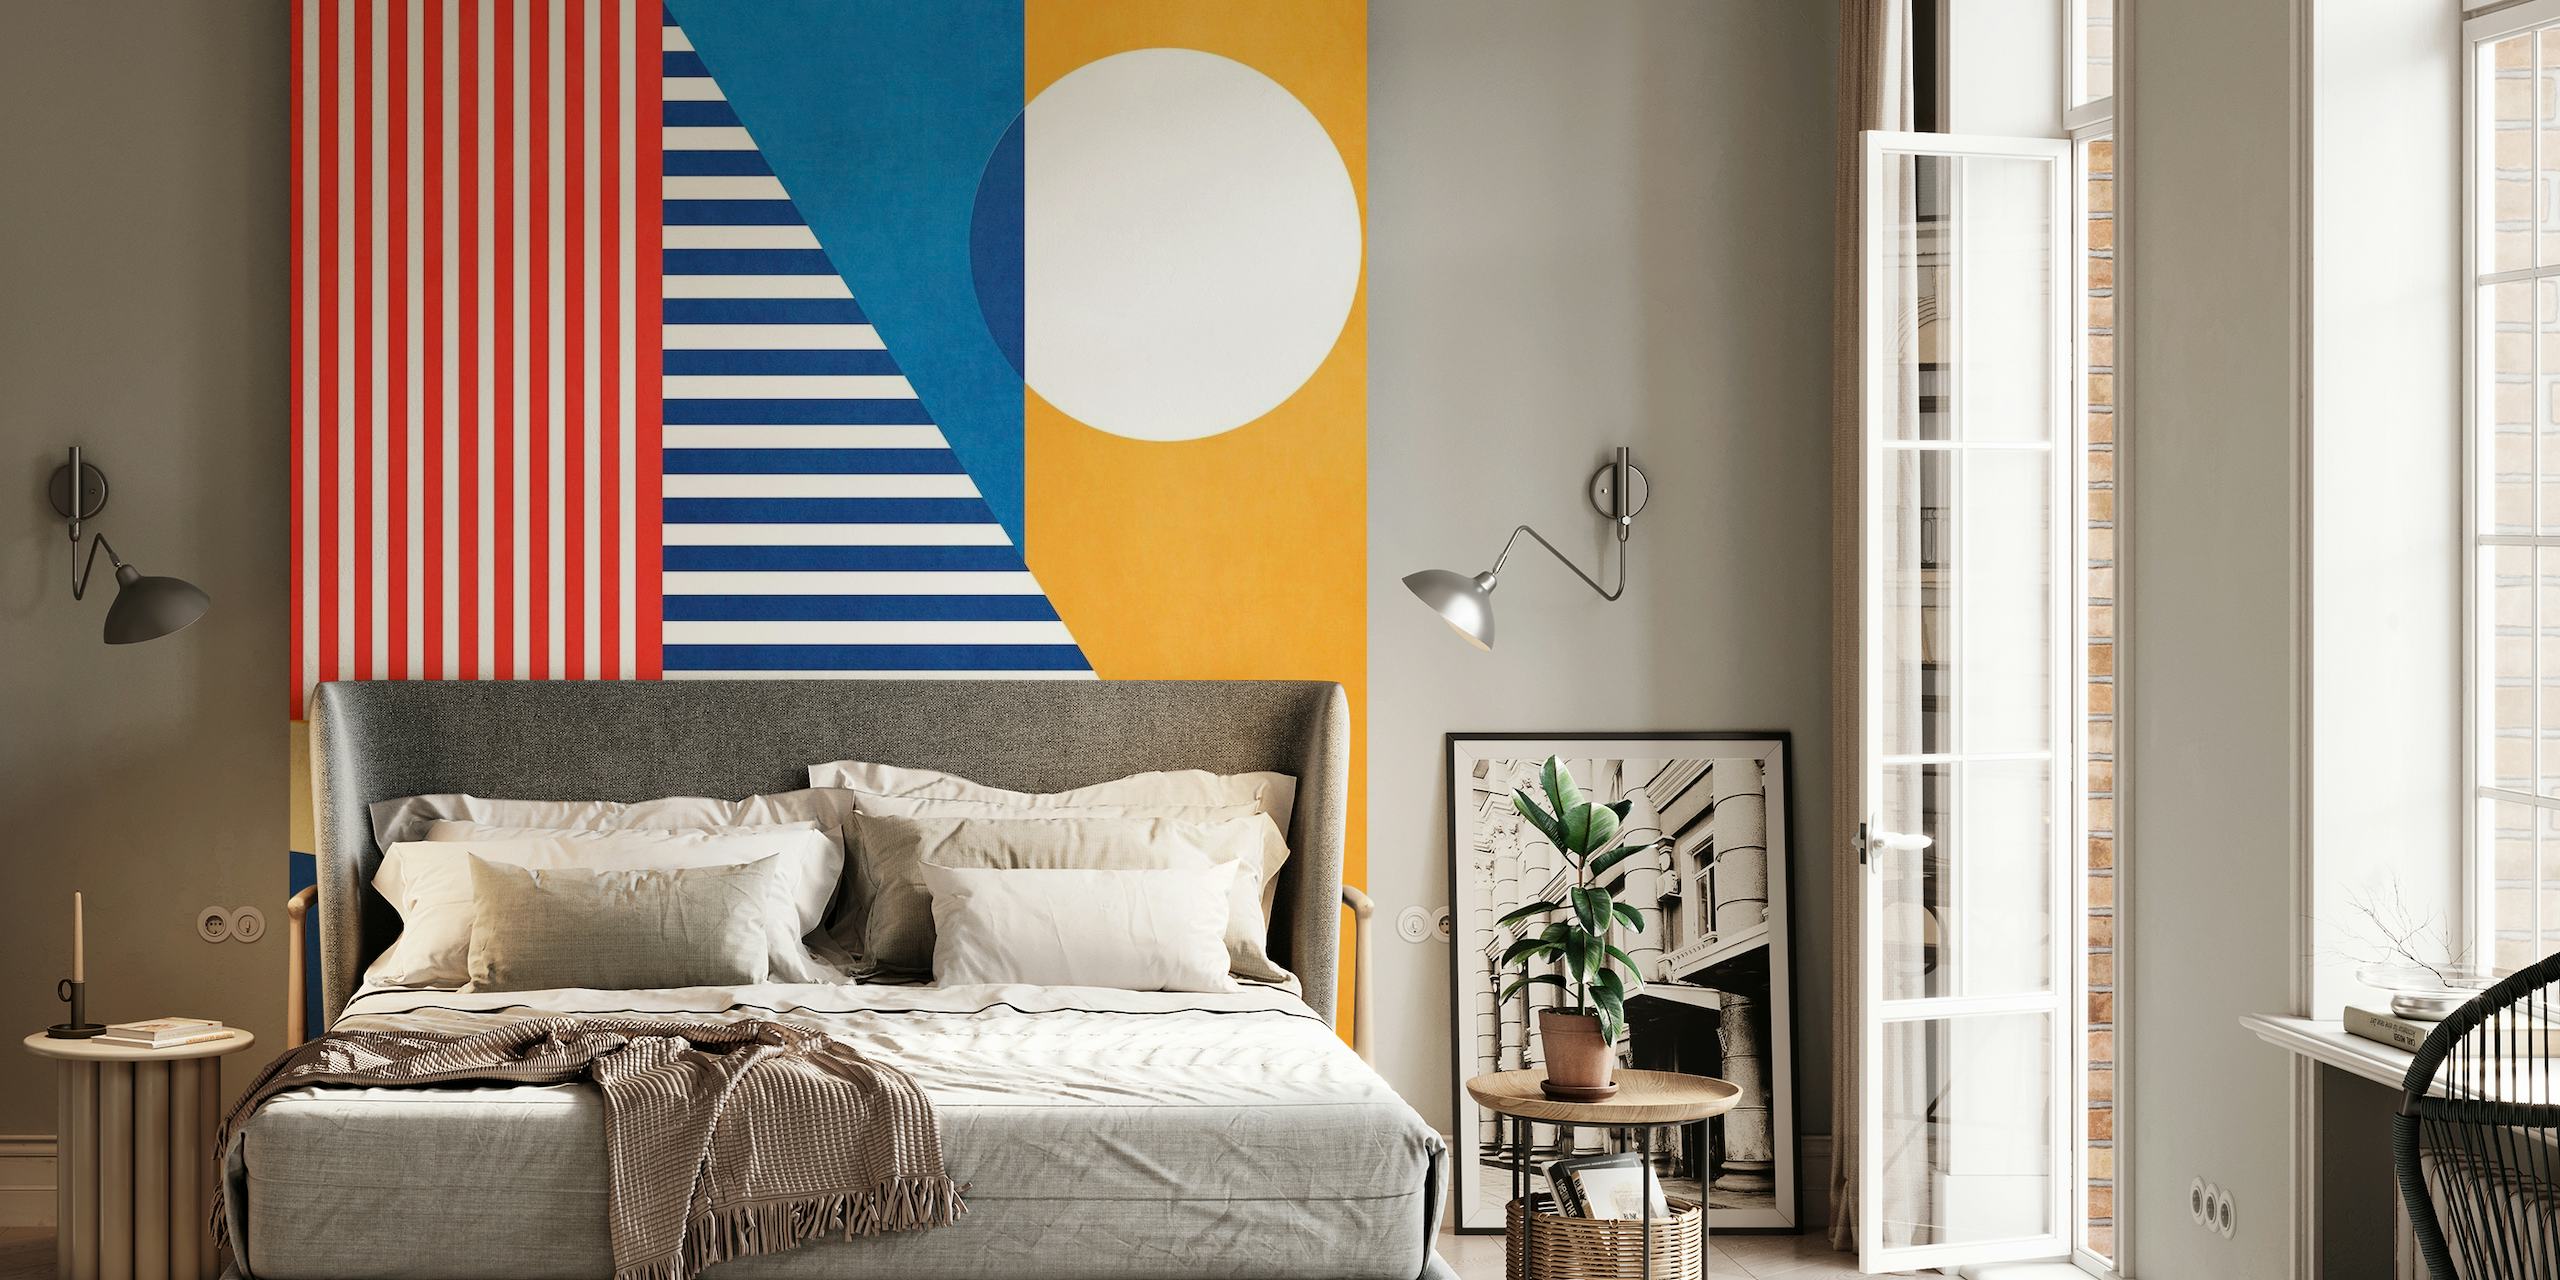 Colorful abstract geometric wall mural with boat motifs